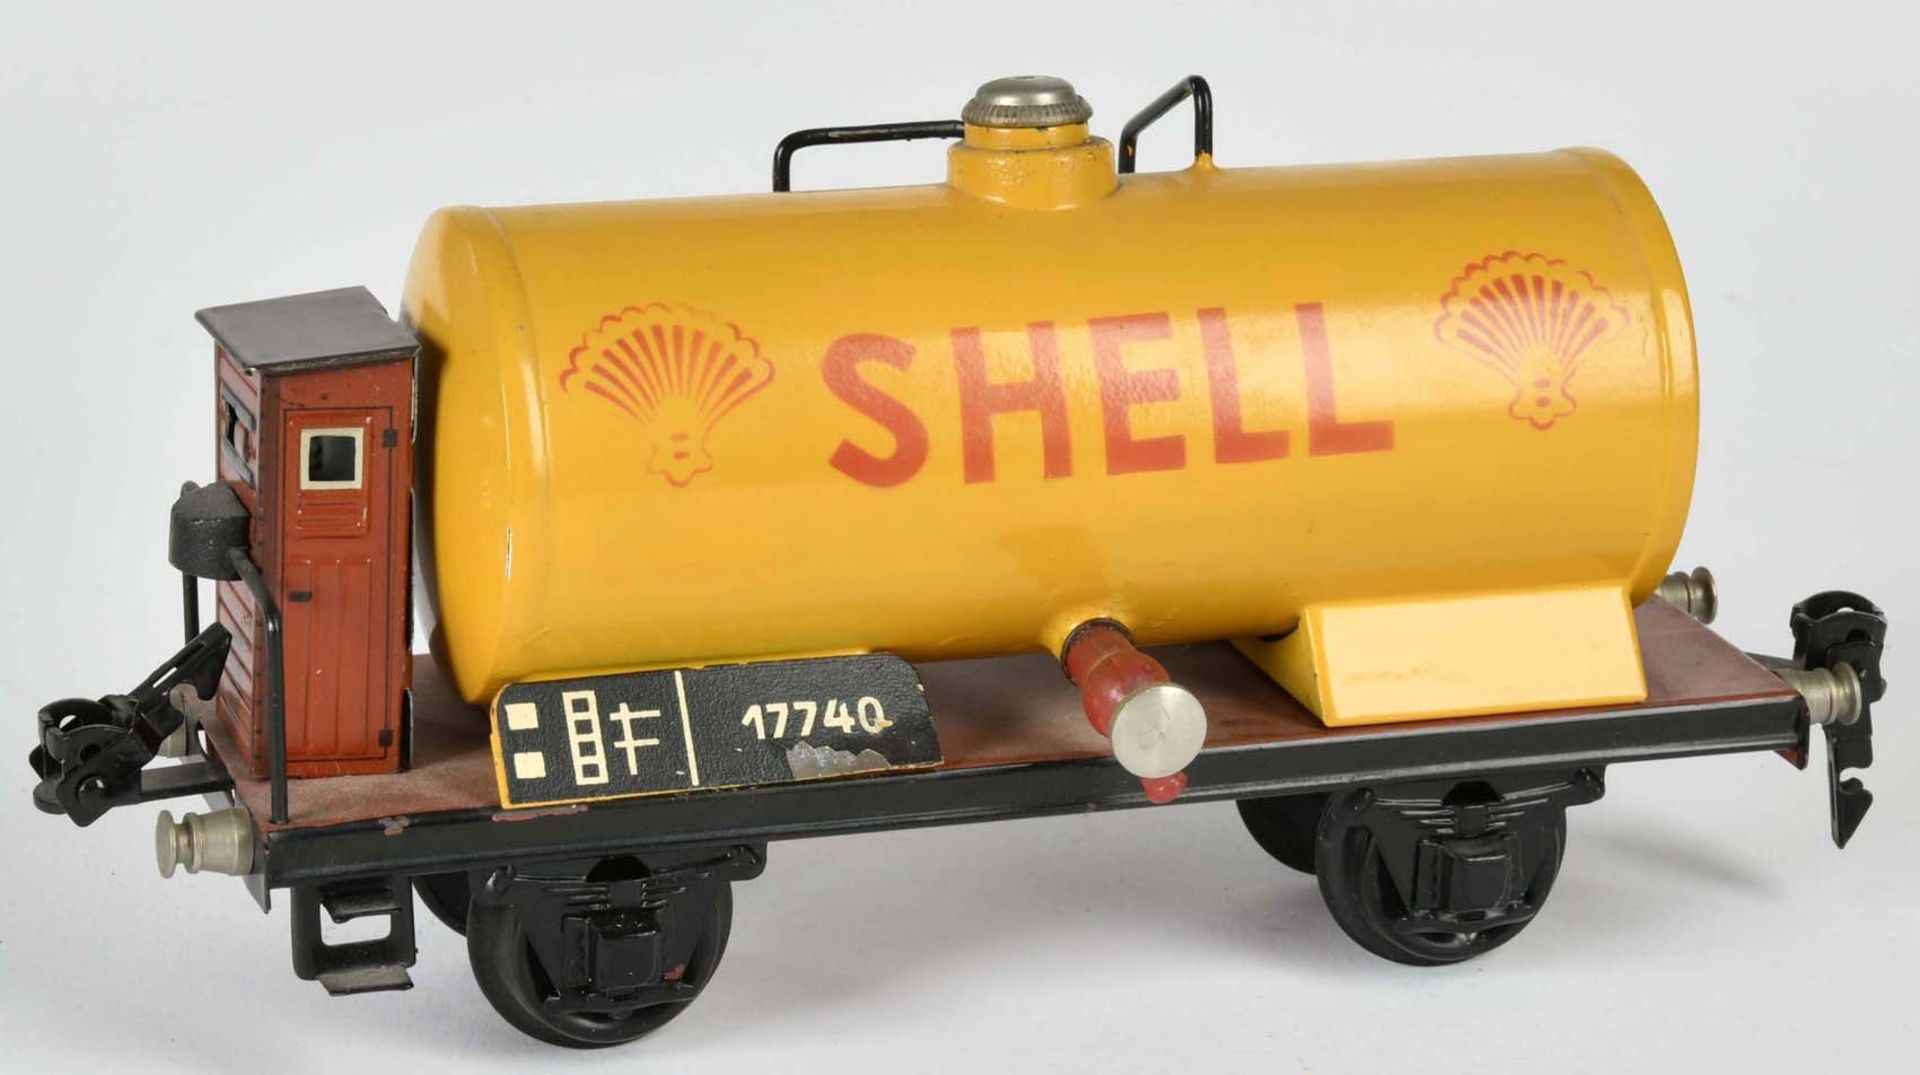 Märklin, tank car "SHELL", Germany pw, gauge 0, min. paint d., otherwise very good condition - Image 2 of 2